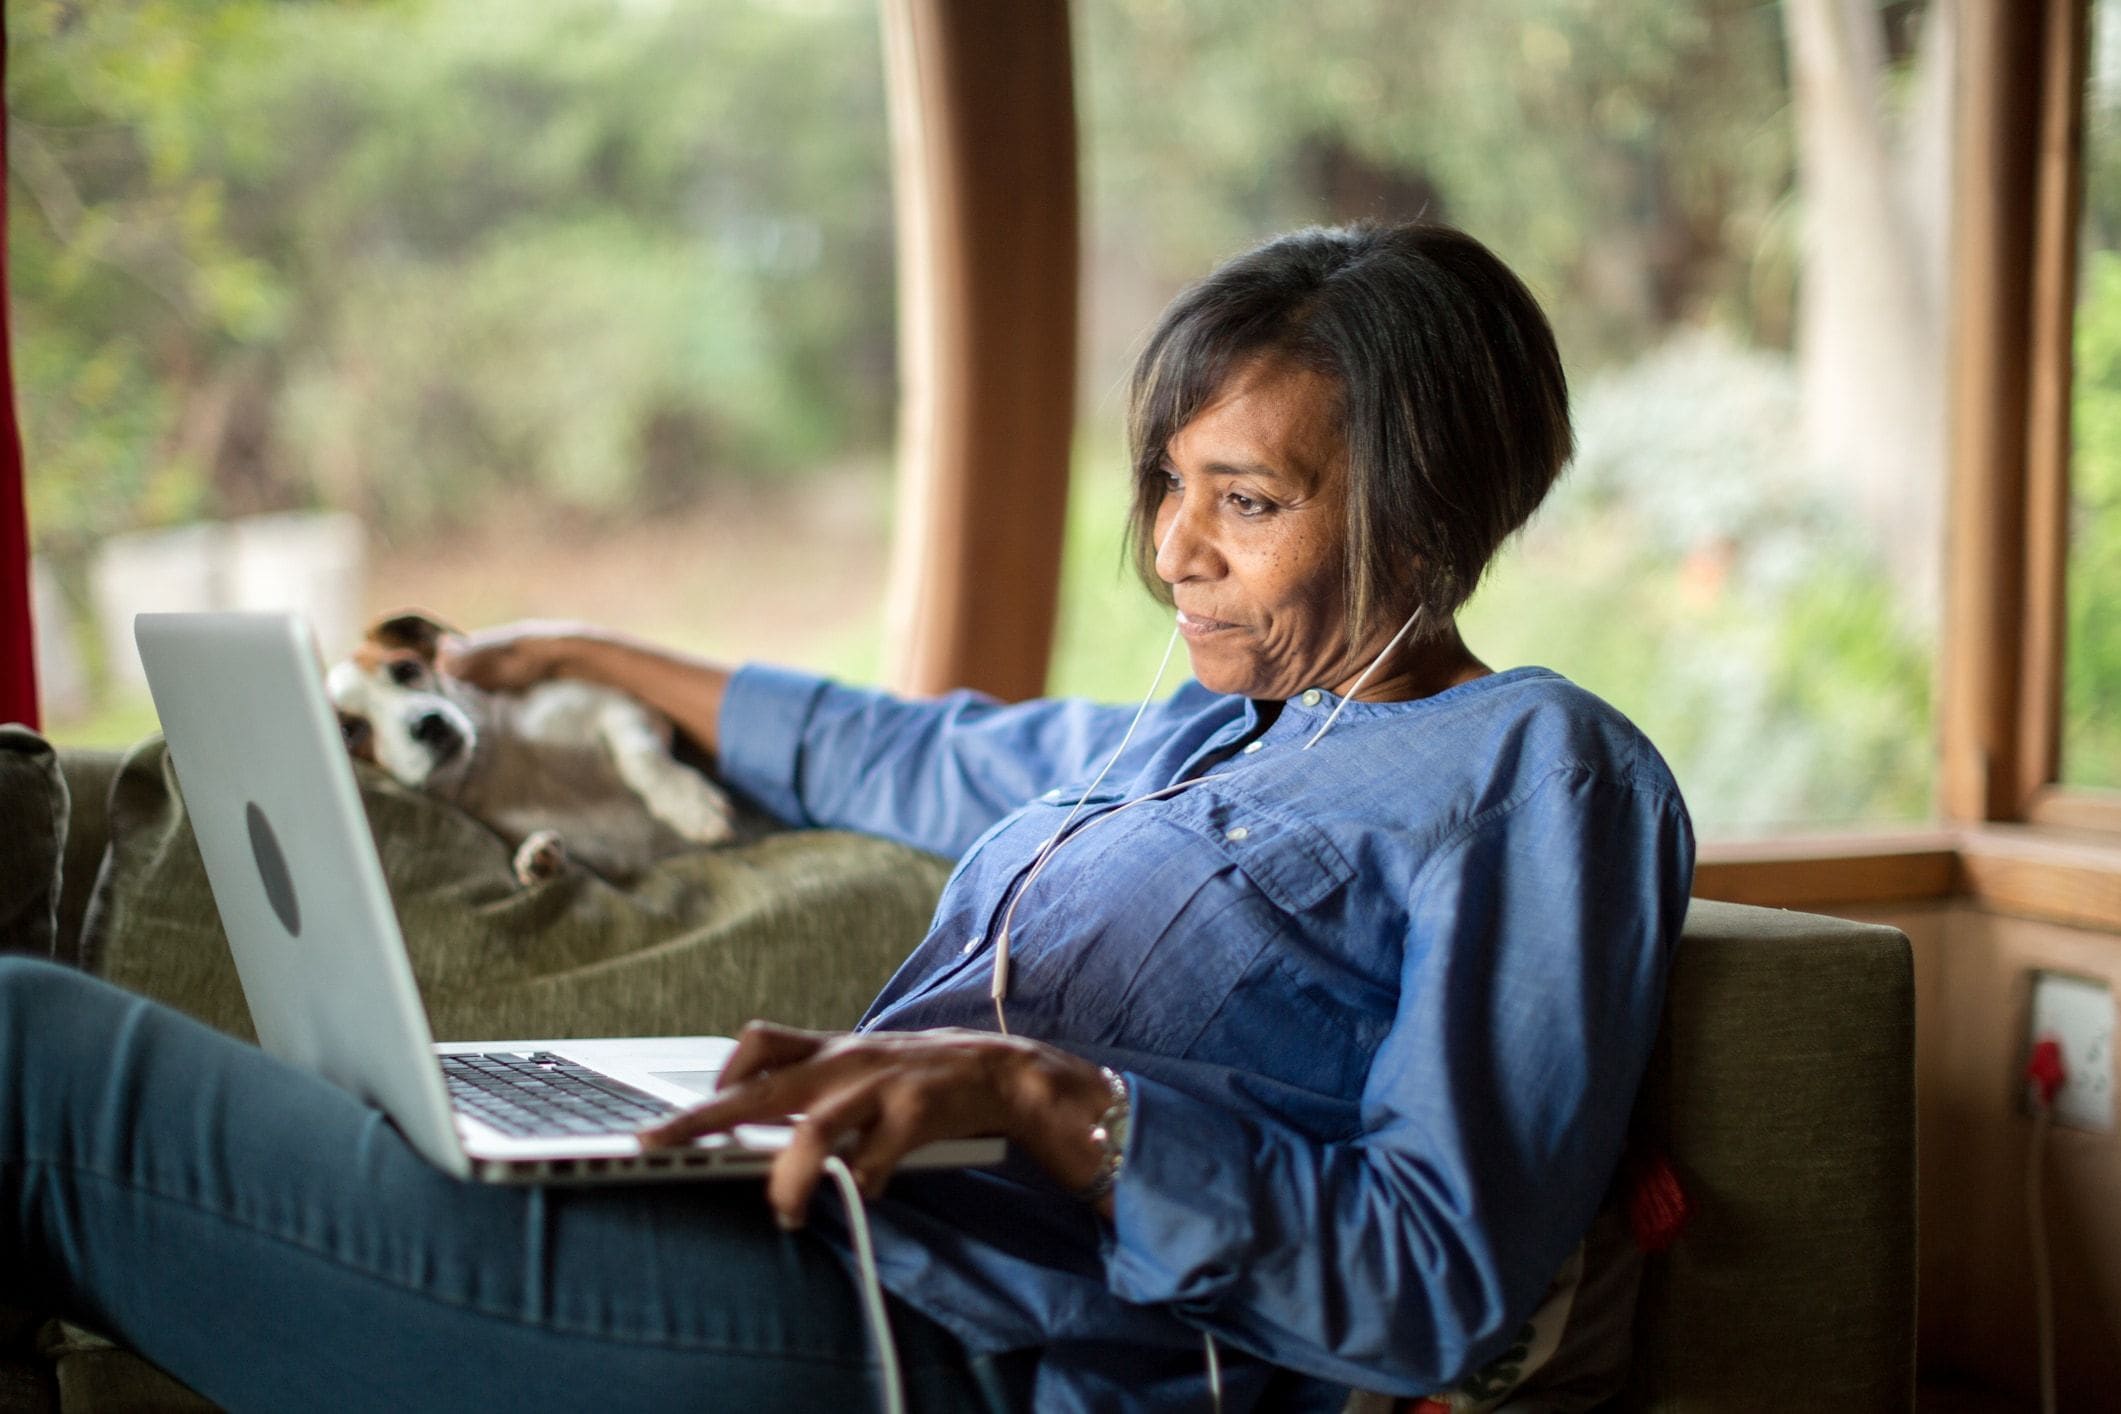 14 high-tech ways to help older adults stay connected